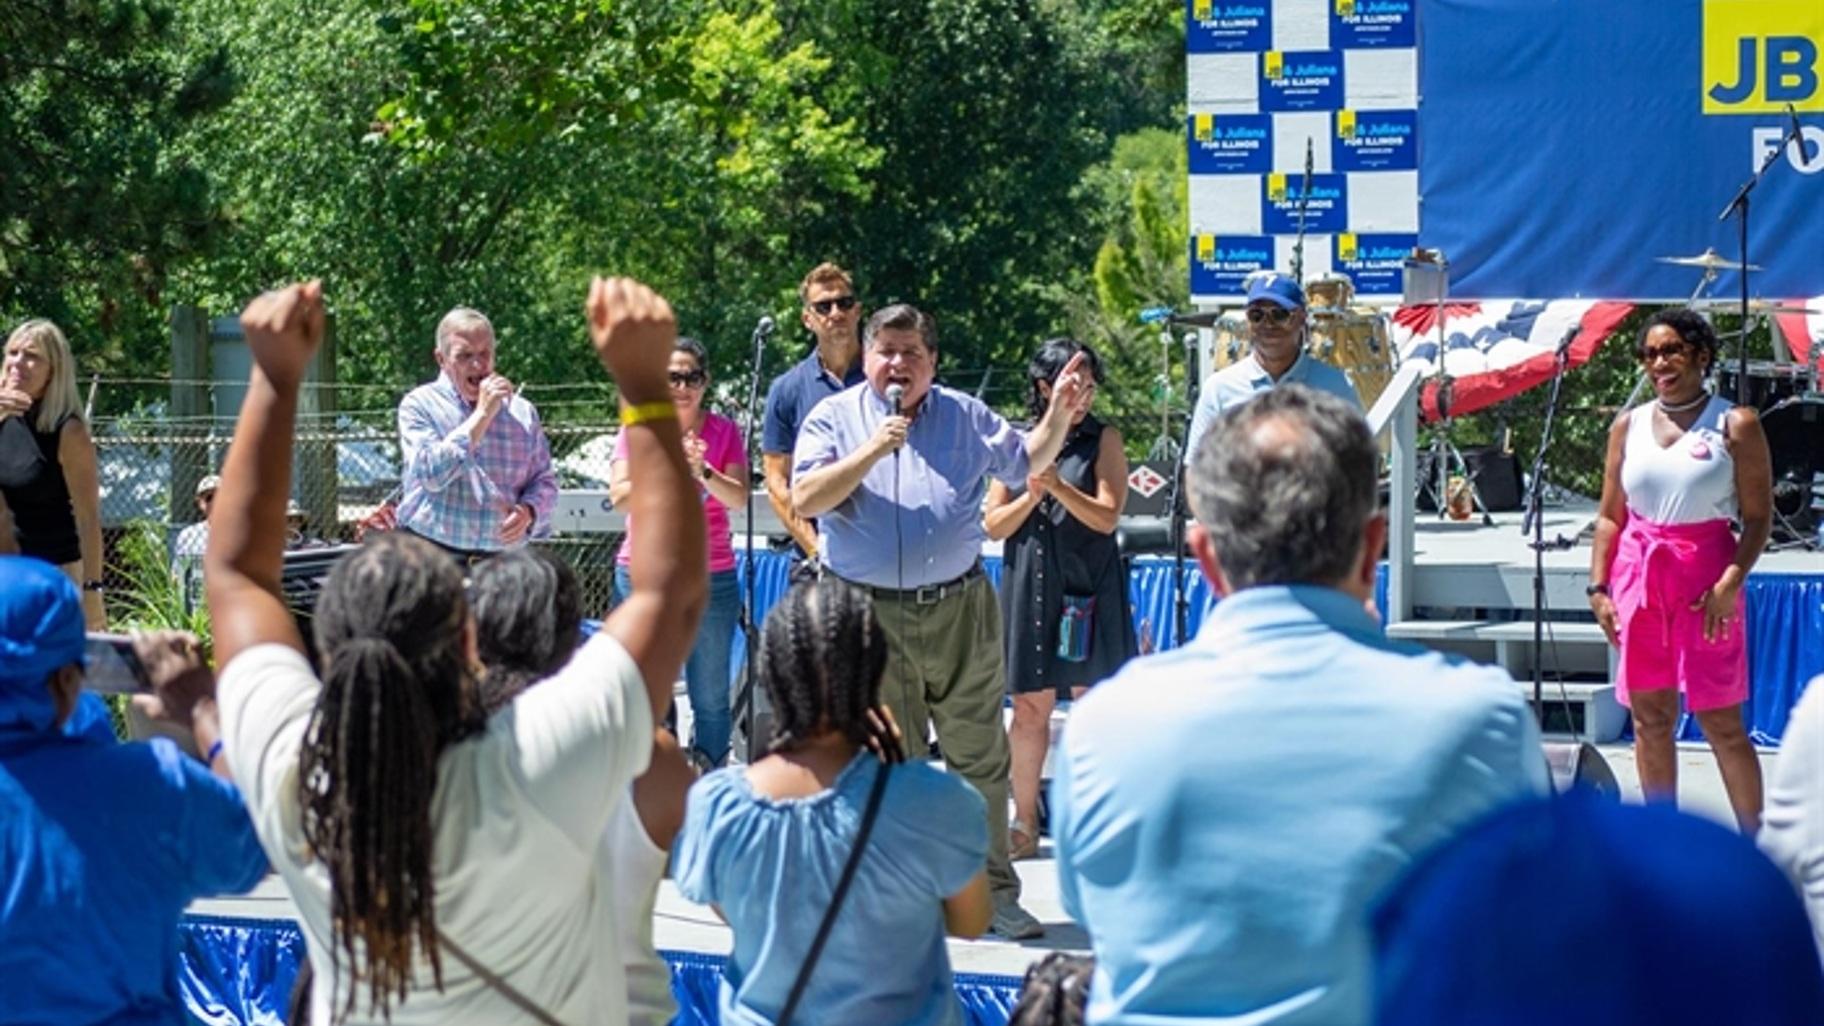 Gov. J.B. Pritzker speaks to the crowd at Governor’s Day at the Illinois State Fair. (Jerry Nowicki / Capitol News Illinois)